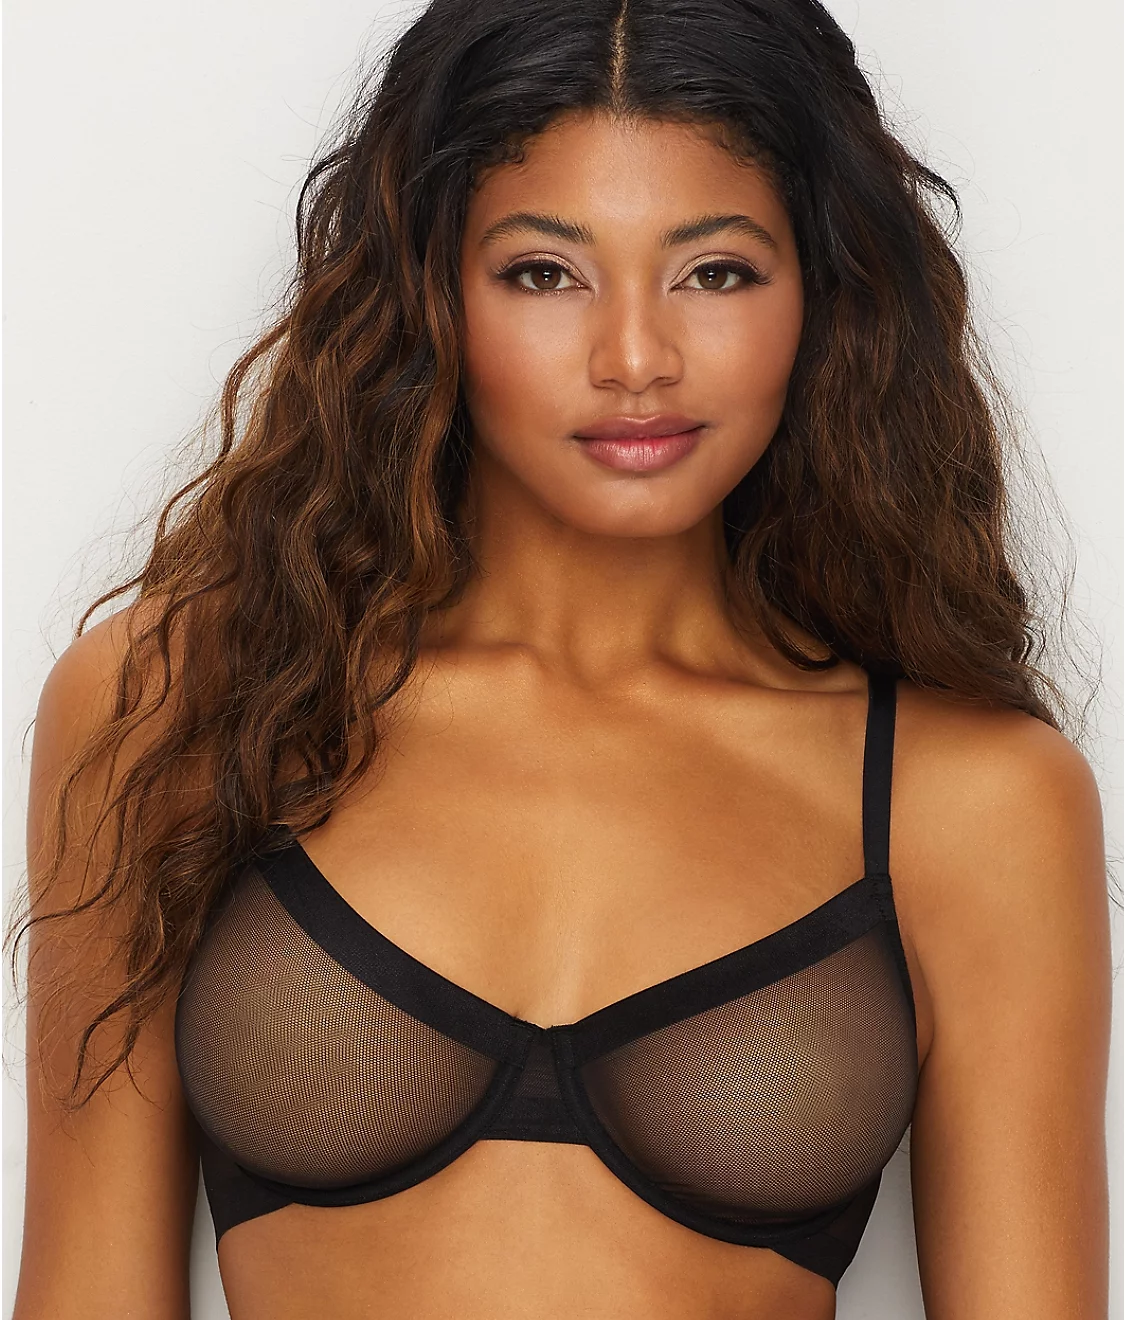 brian otey recommends best see through lingerie pic